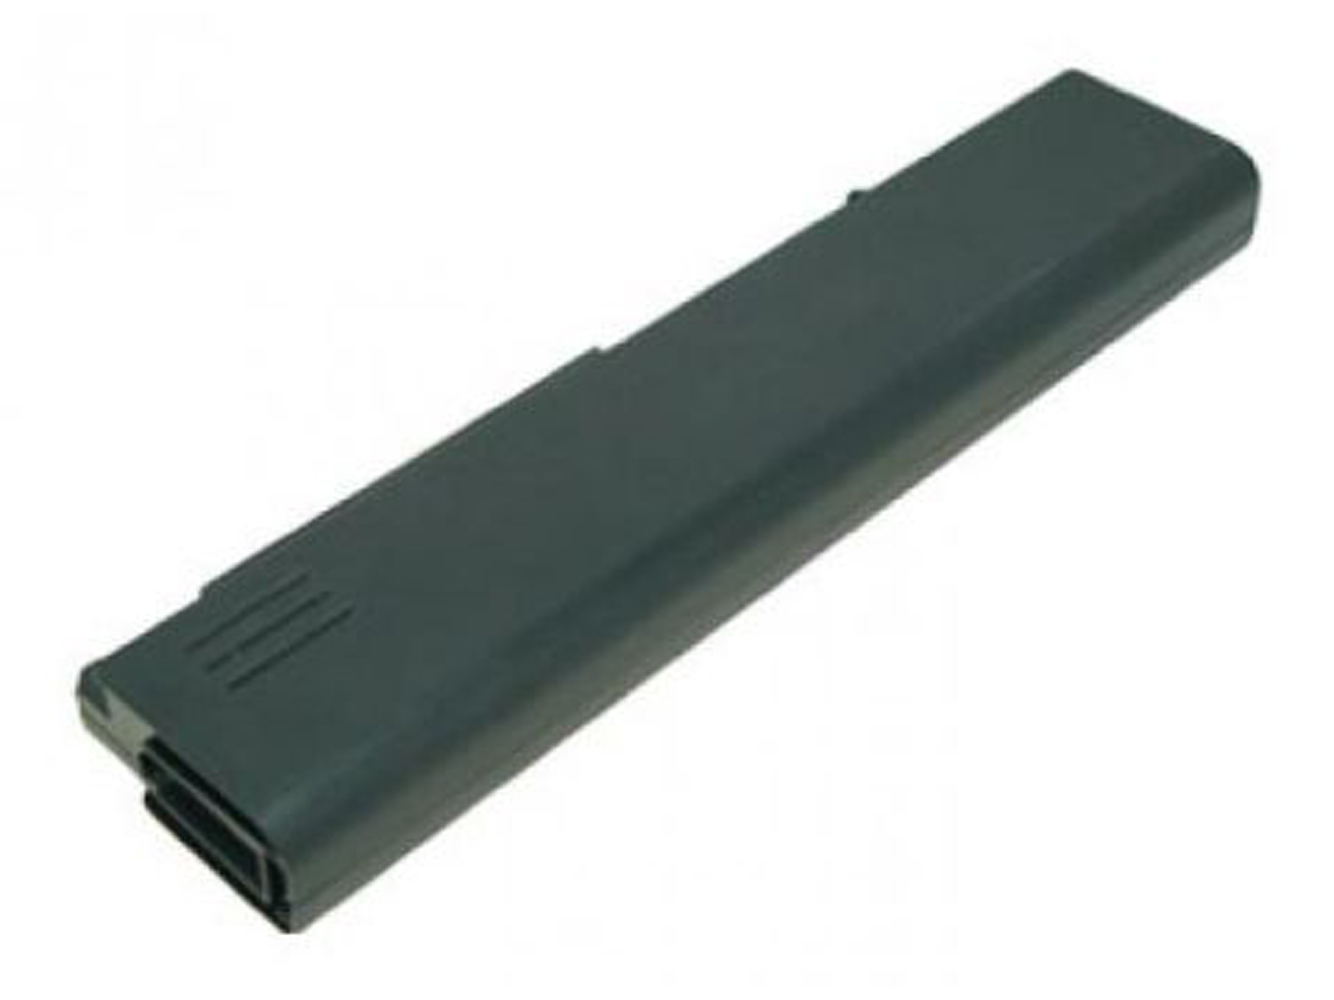 Replacement for HP COMPAQ Business Notebook NX5100, HP COMPAQ Business Notebook 6000, NC6105, NC6000, NX6100, NX6300 Series Laptop Battery